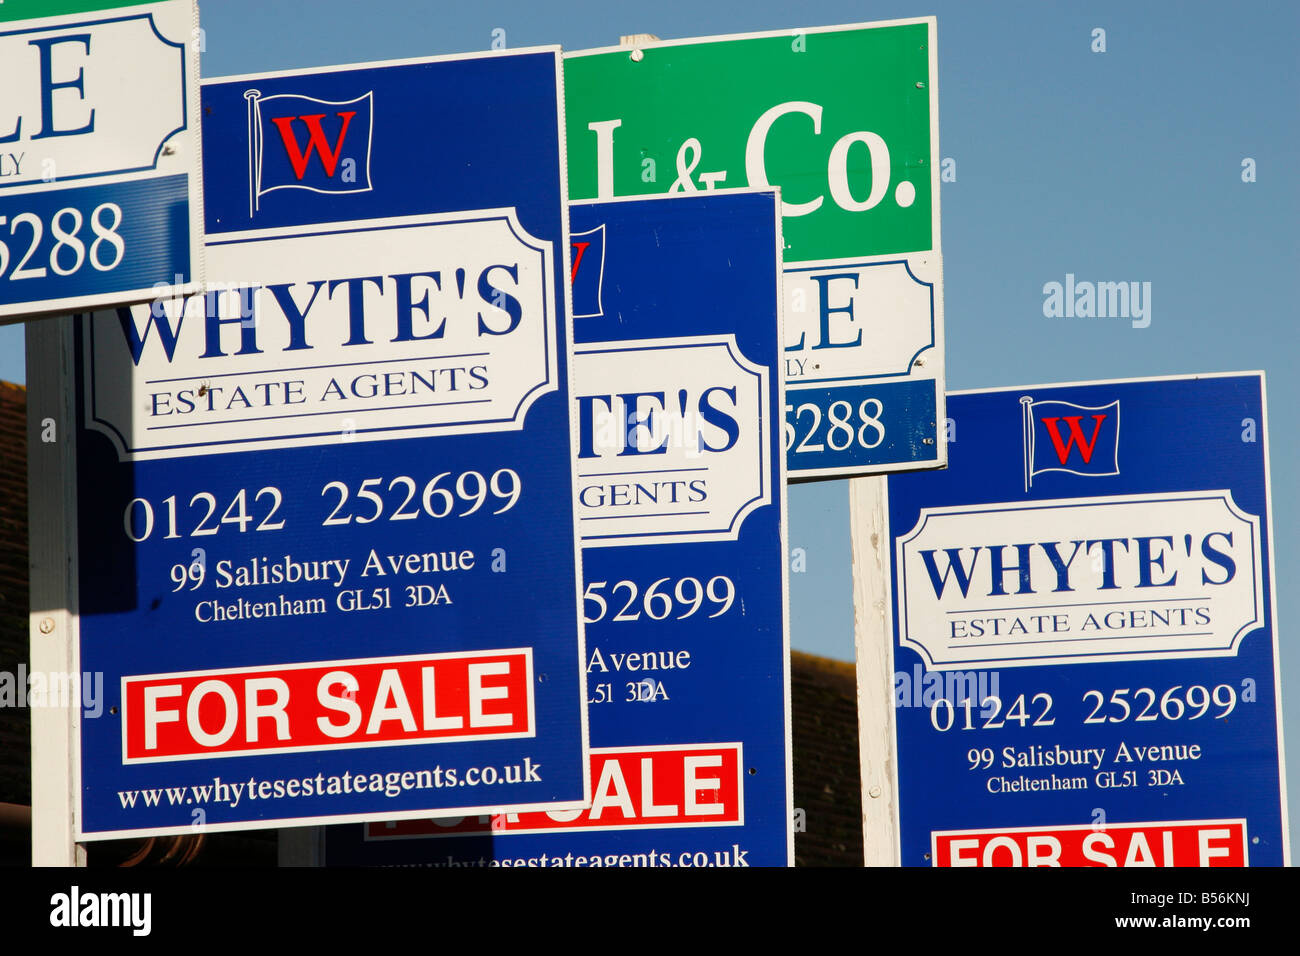 Property for sale signs in the UK. Stock Photo